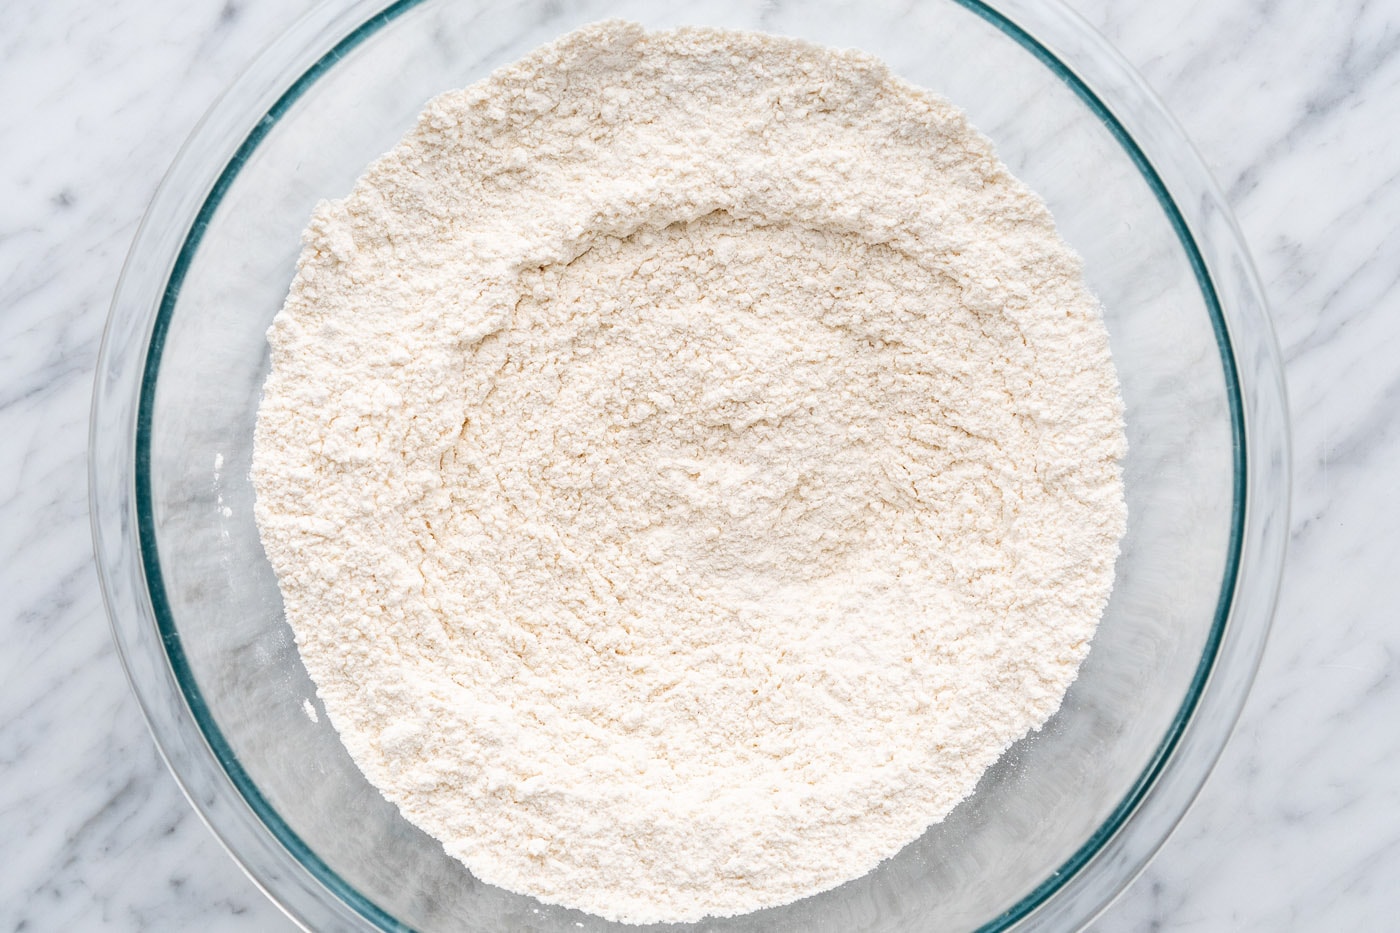 dry ingredients for muffin batter in a bowl